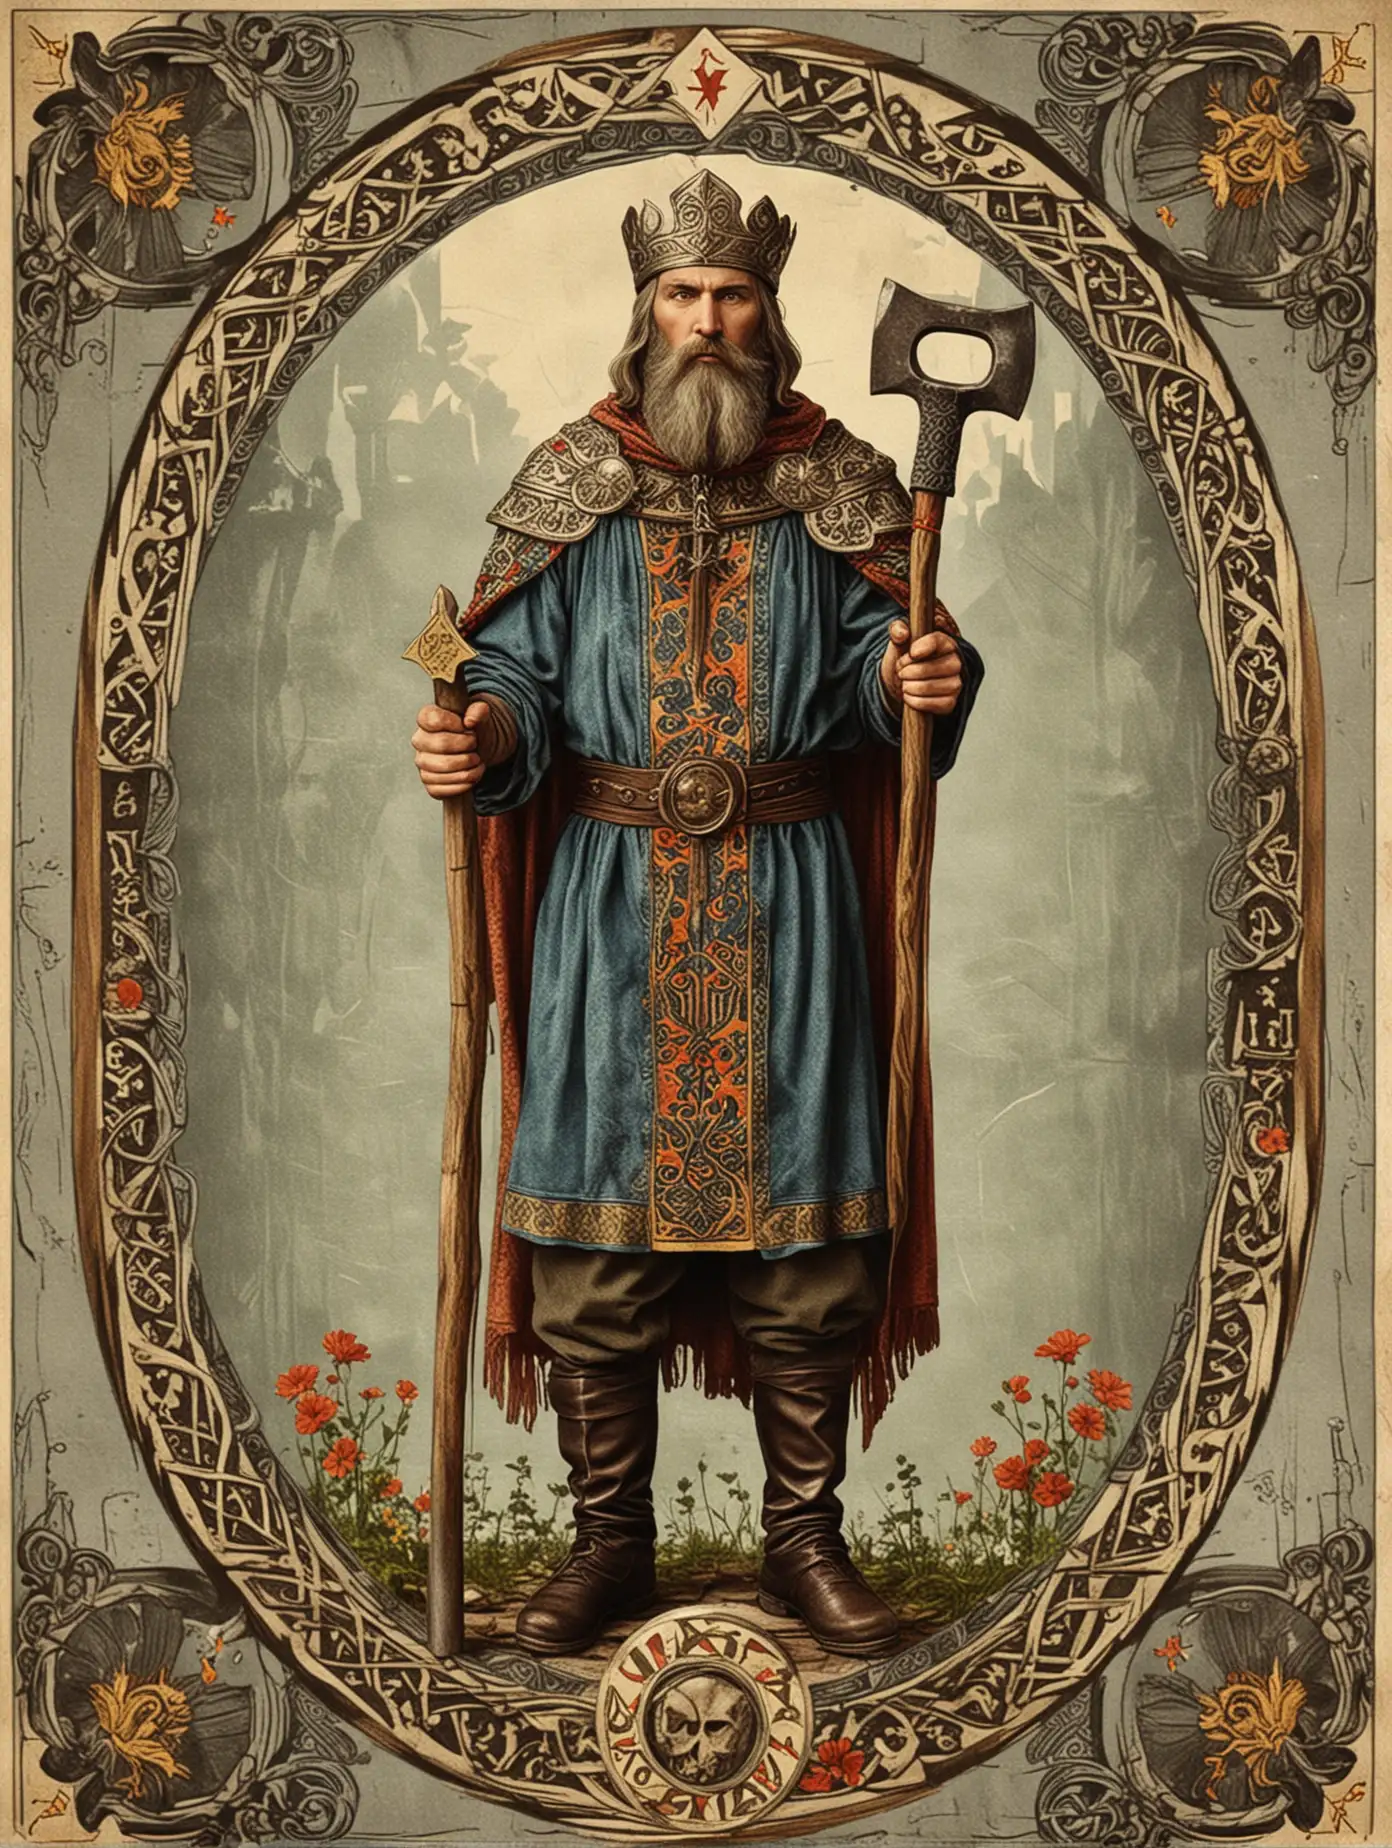 Slavic-Style-Tarot-Card-with-Symmetrical-Design-Featuring-a-Man-with-a-Hammer